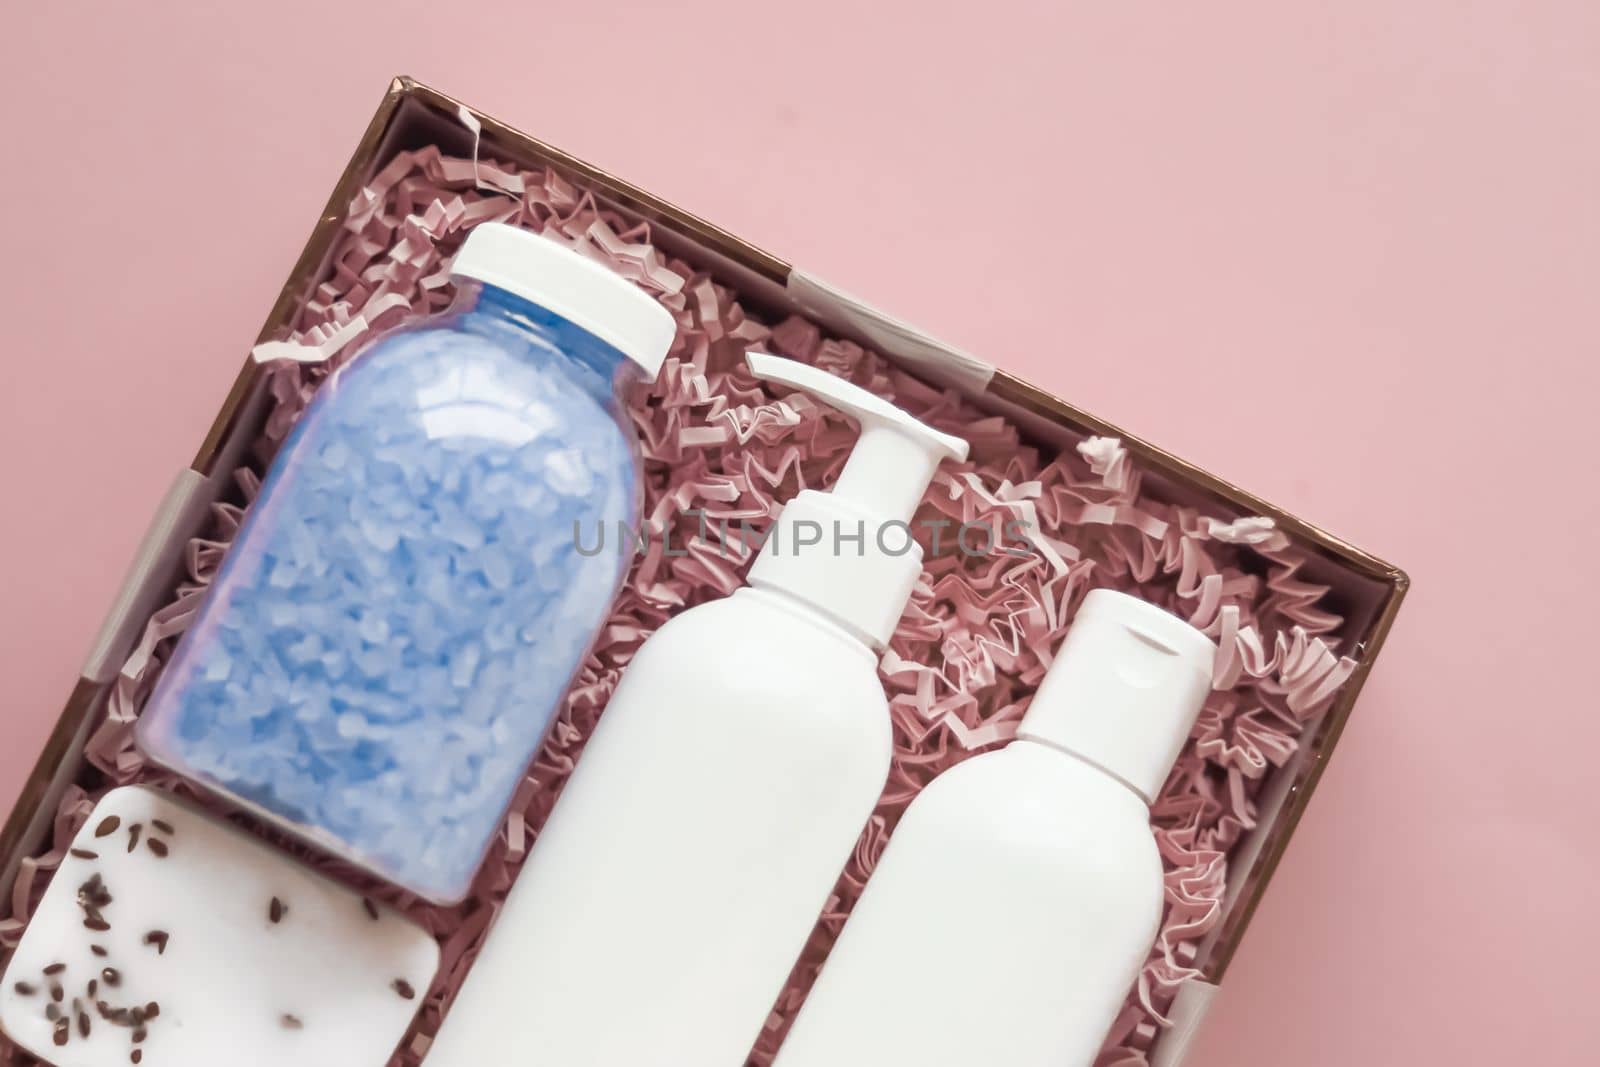 Beauty box subscription package, luxury skincare and body care products, milk lotion, bath salt, soap, shower gel as flat lay, spa cosmetics as holiday gift, online shopping delivery, flatlay.